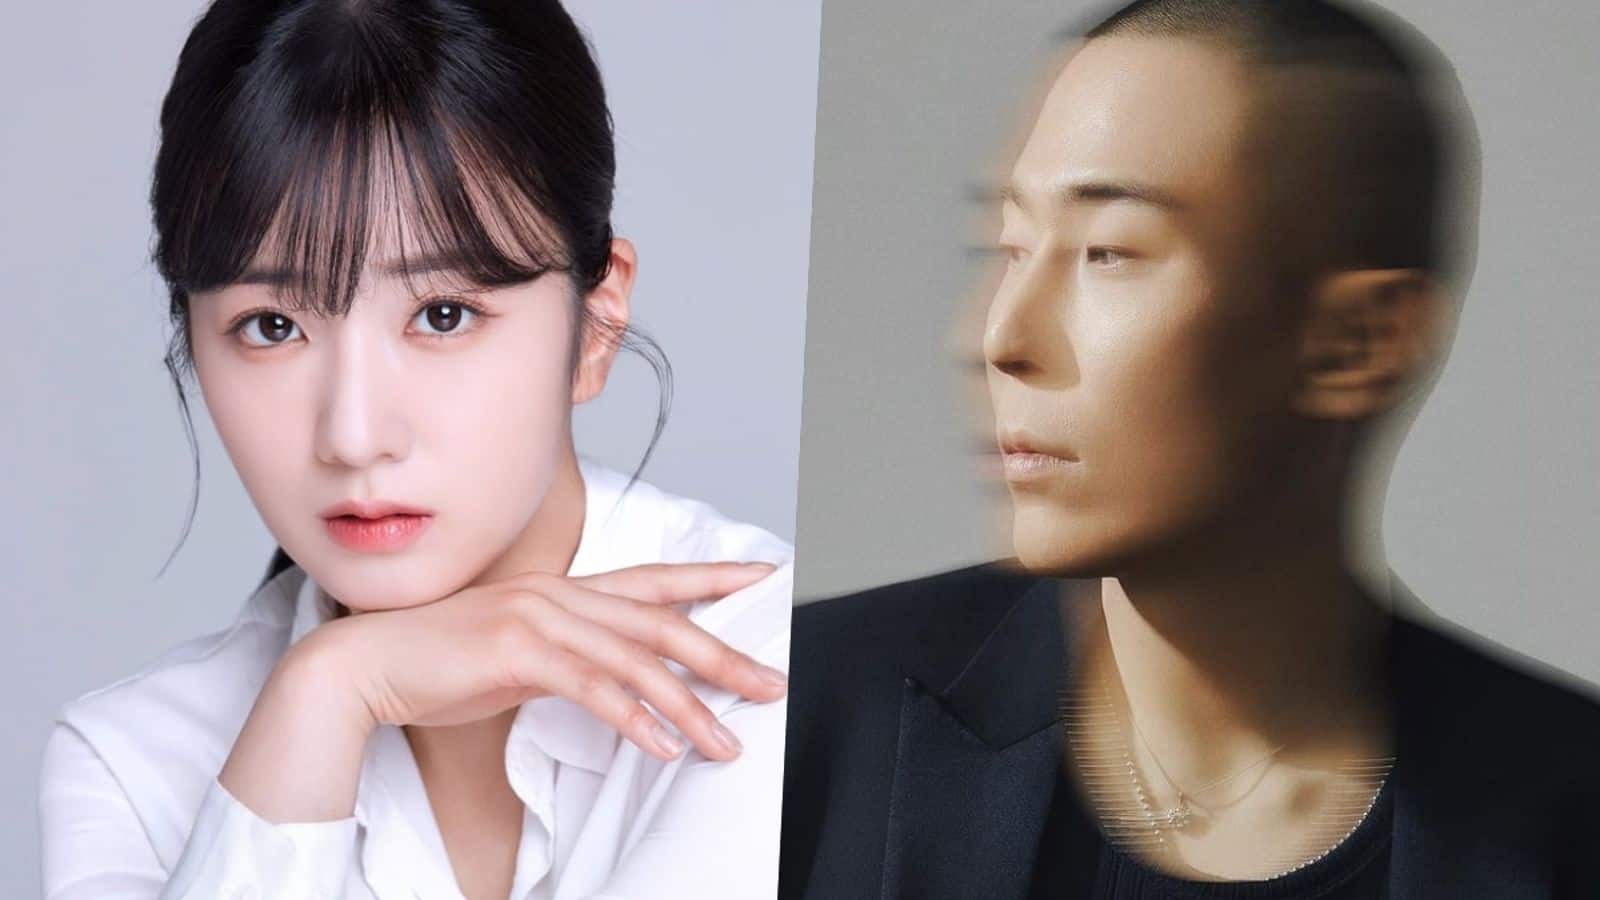 Apink's Yoon Bomi and producer Rado confirm their relationship